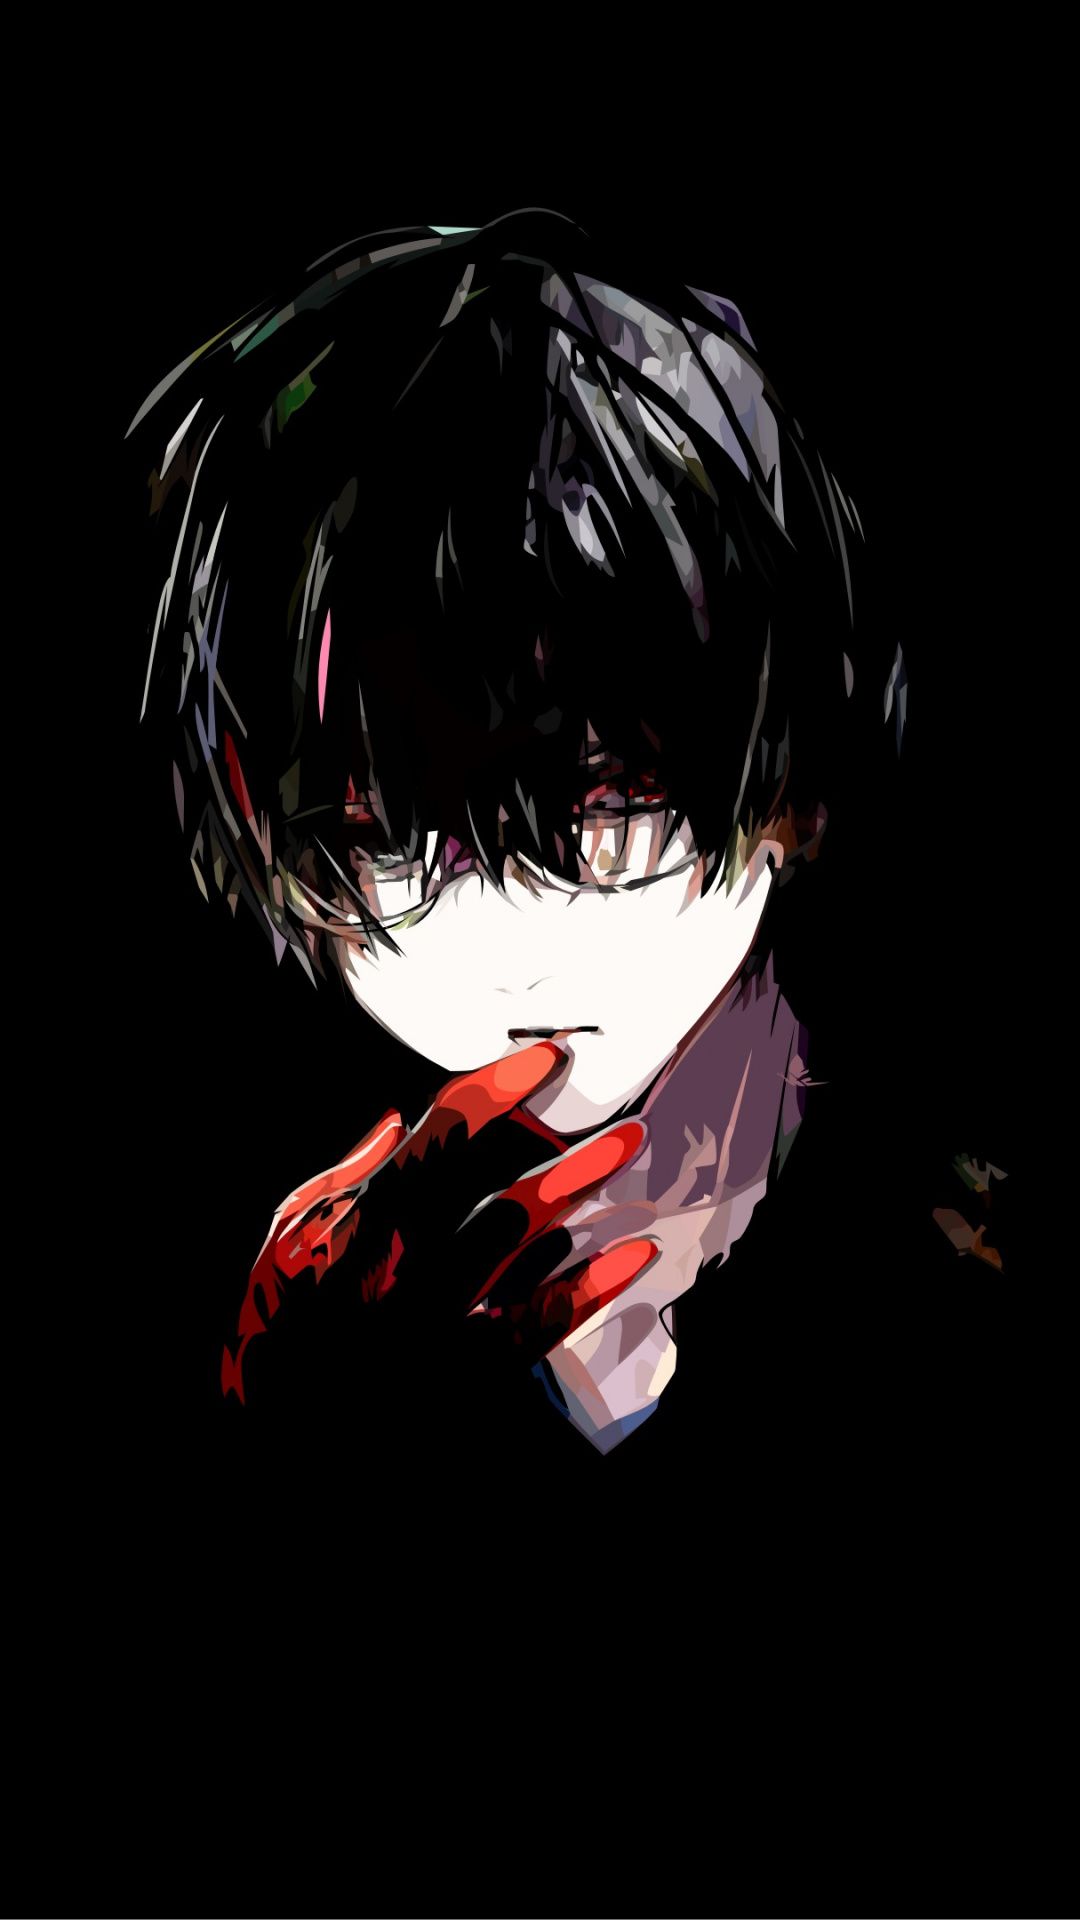 Tokyo Ghoul, Anime, Black, Darkness, Fictional Character Sad